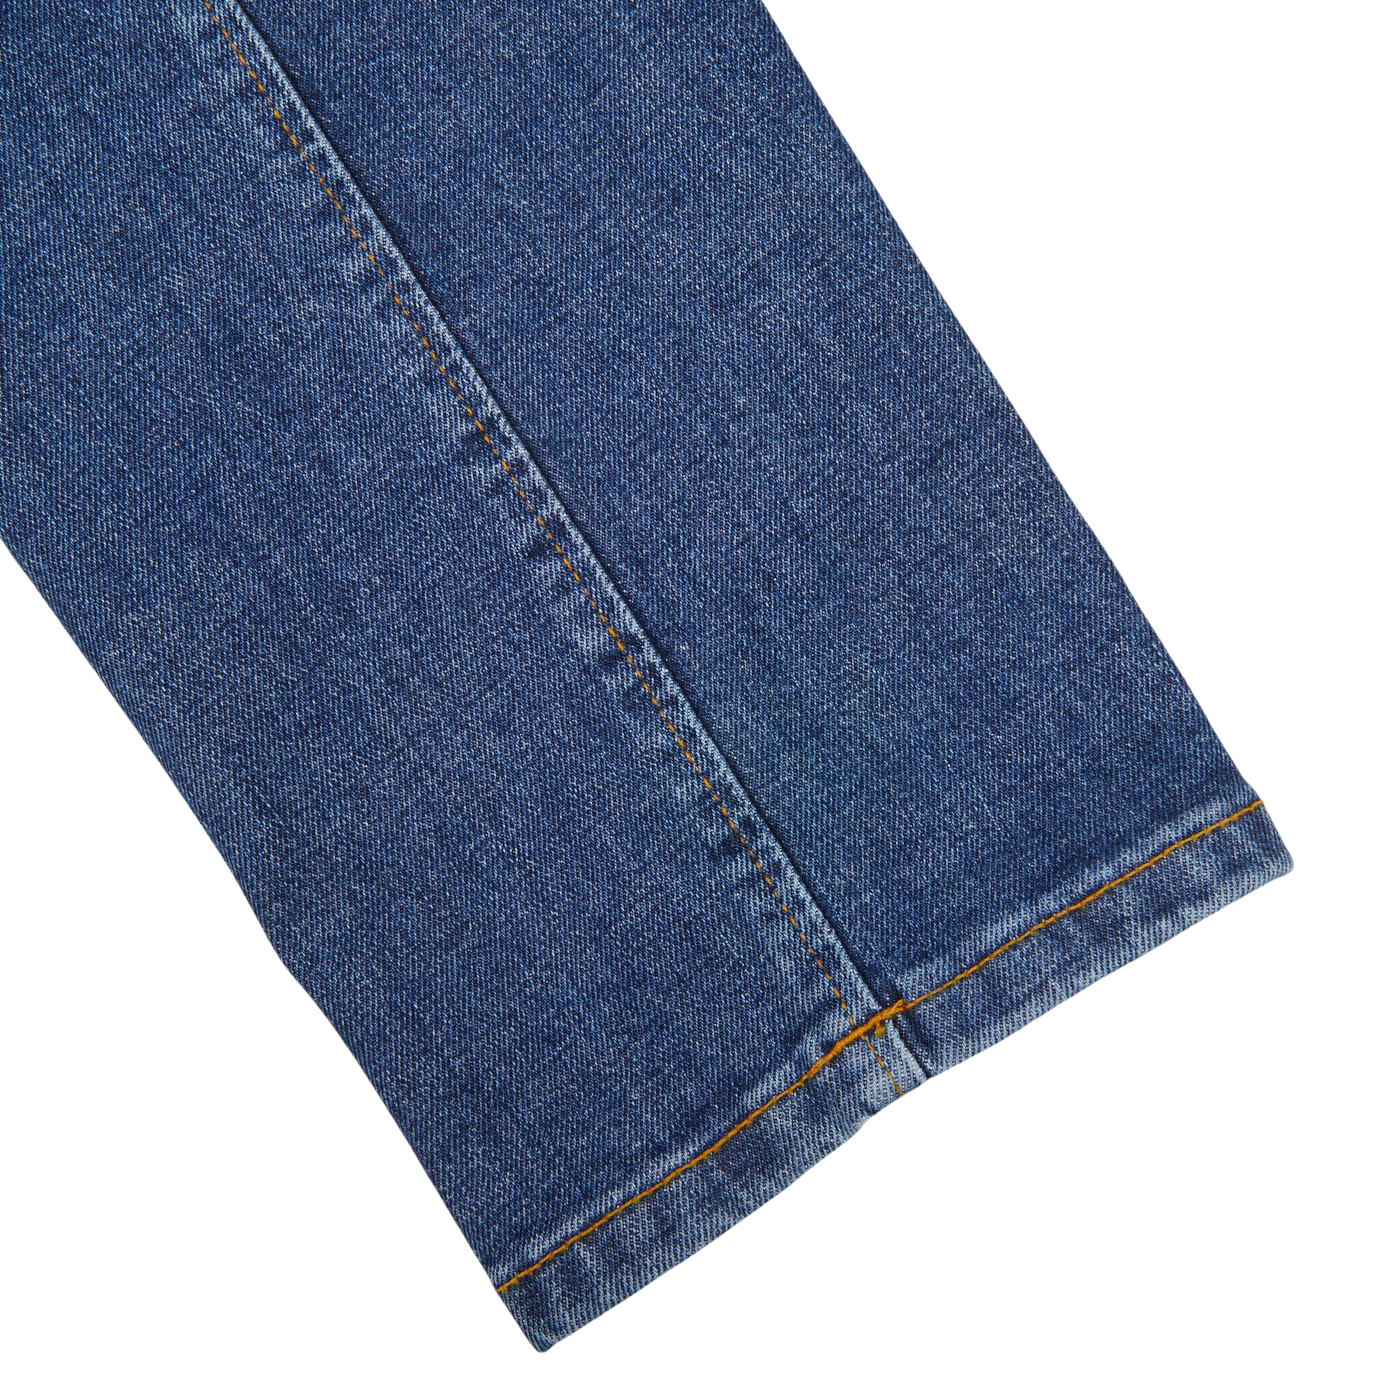 Regular Faded Blue Breathable Skin Friendly Wrinkle Free Casual Wear Cotton  Men's Jeans at Best Price in Salem | Dhurgarani Textiles